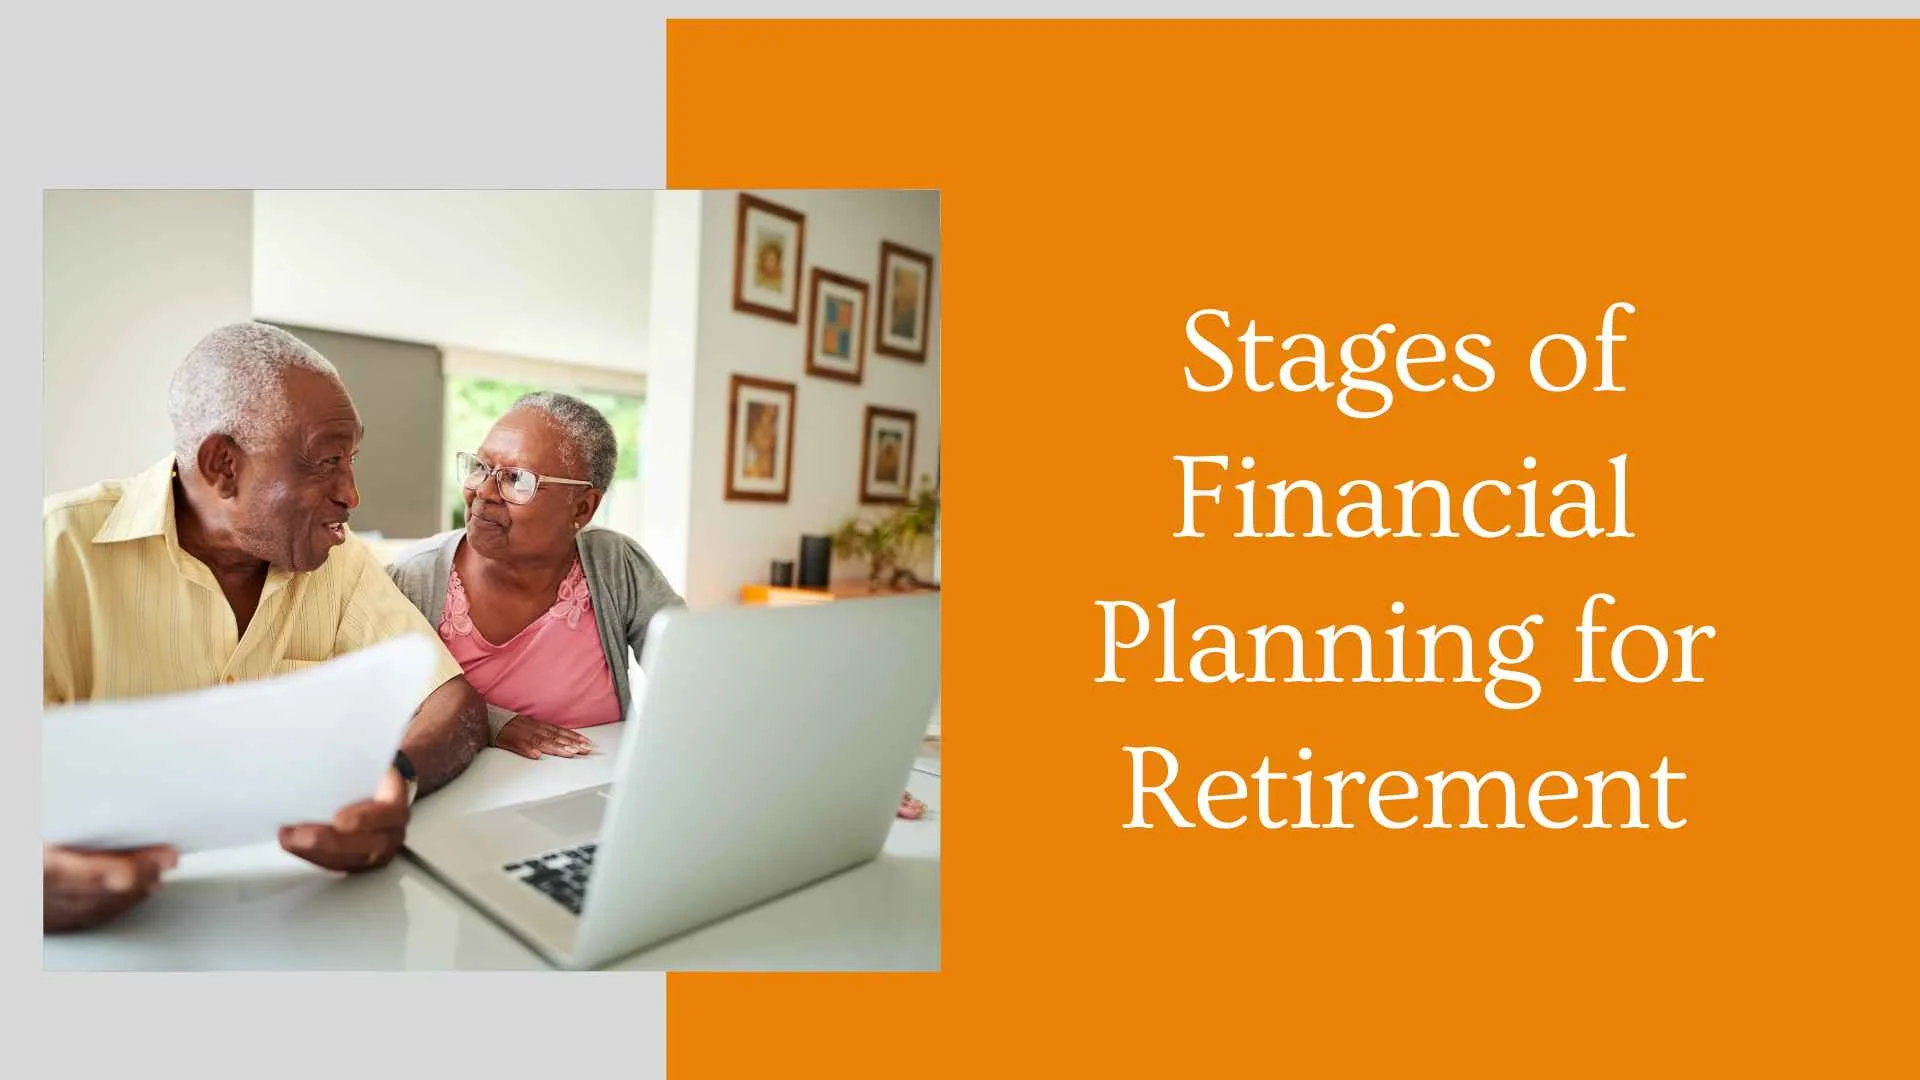 Stages of Financial Planning for Retirement